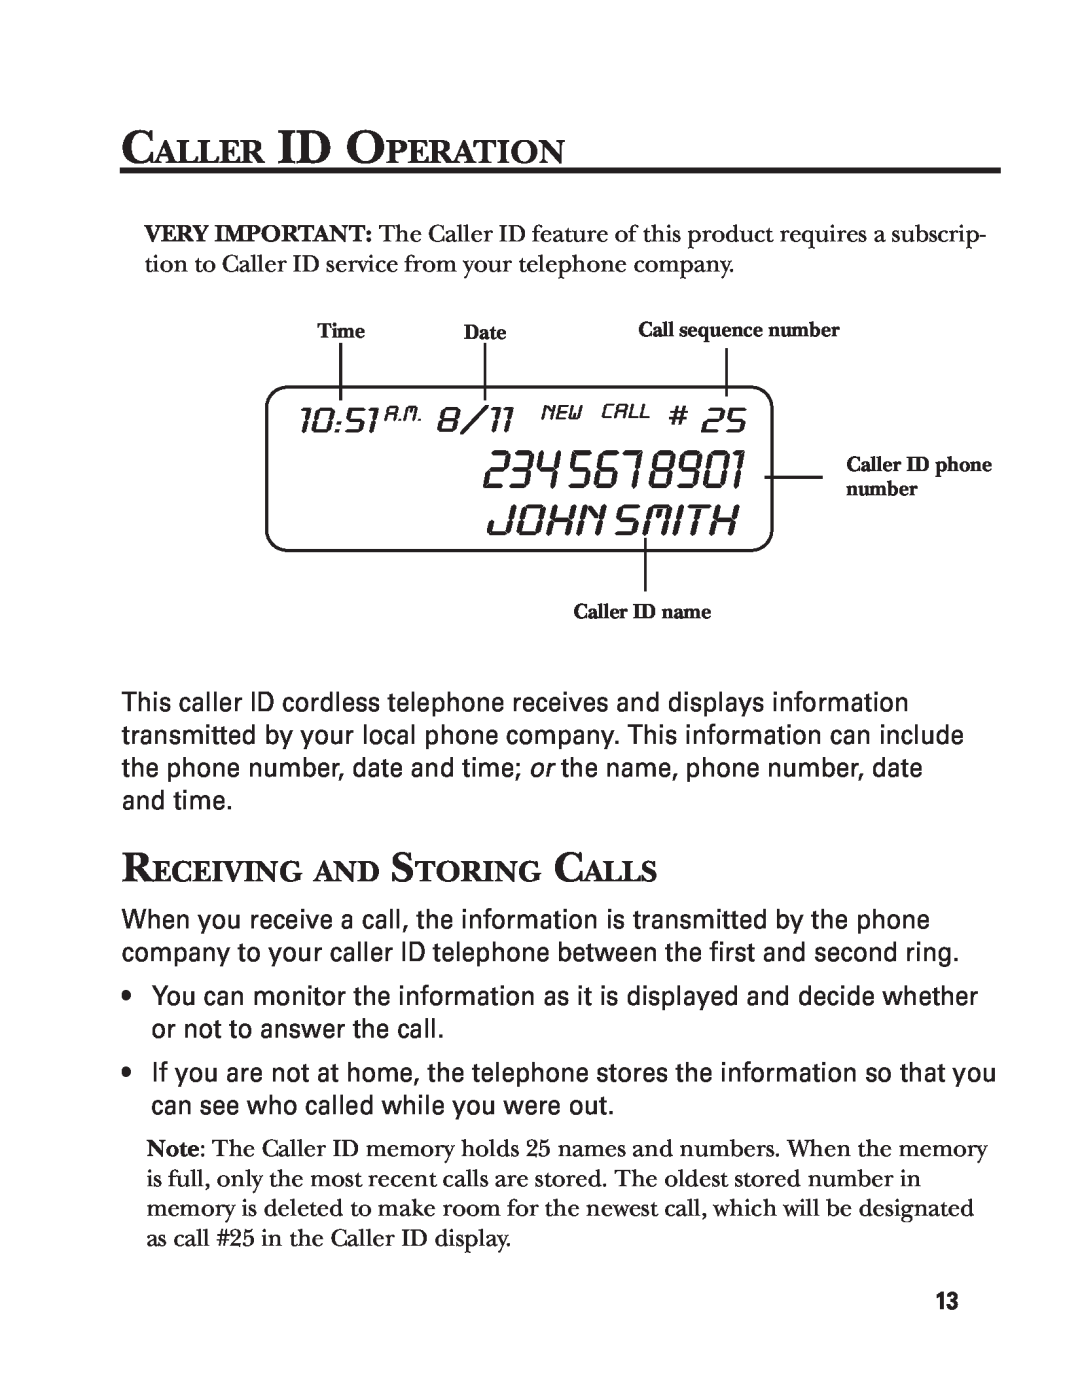 GE 2-9772 manual Caller Id Operation, Receiving And Storing Calls, 234 567, John Smith, 1051 A.M. 8/11 